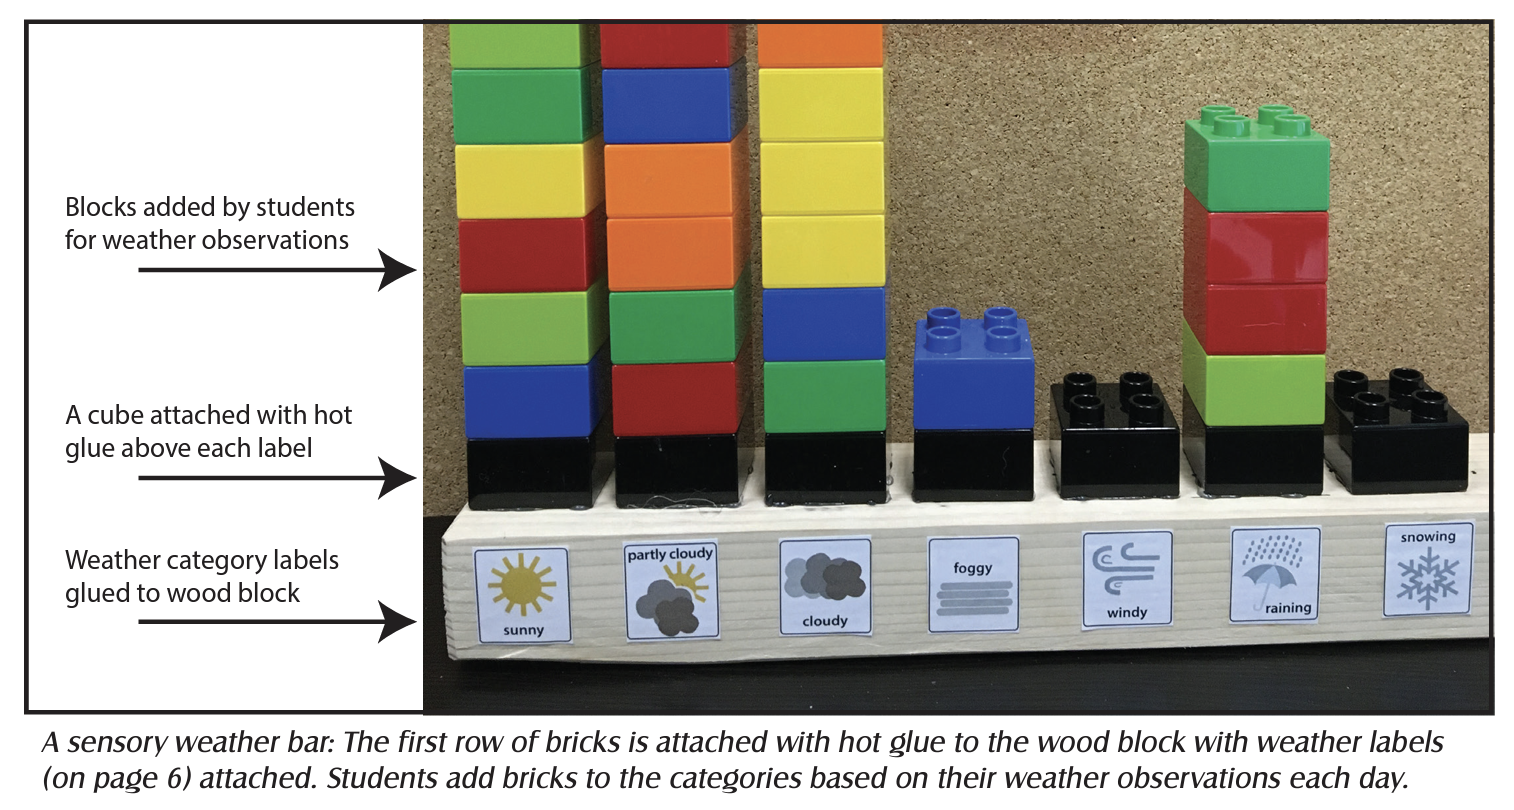 screenshot from Elementary GLOBE activity "Weather Adds Up to Climate" showing a sensory weather bar; text reads "The first row of bricks is attached with hot glue to the wood block with weather labels attached. Students add bricks to the categories based on their weather observations each day."